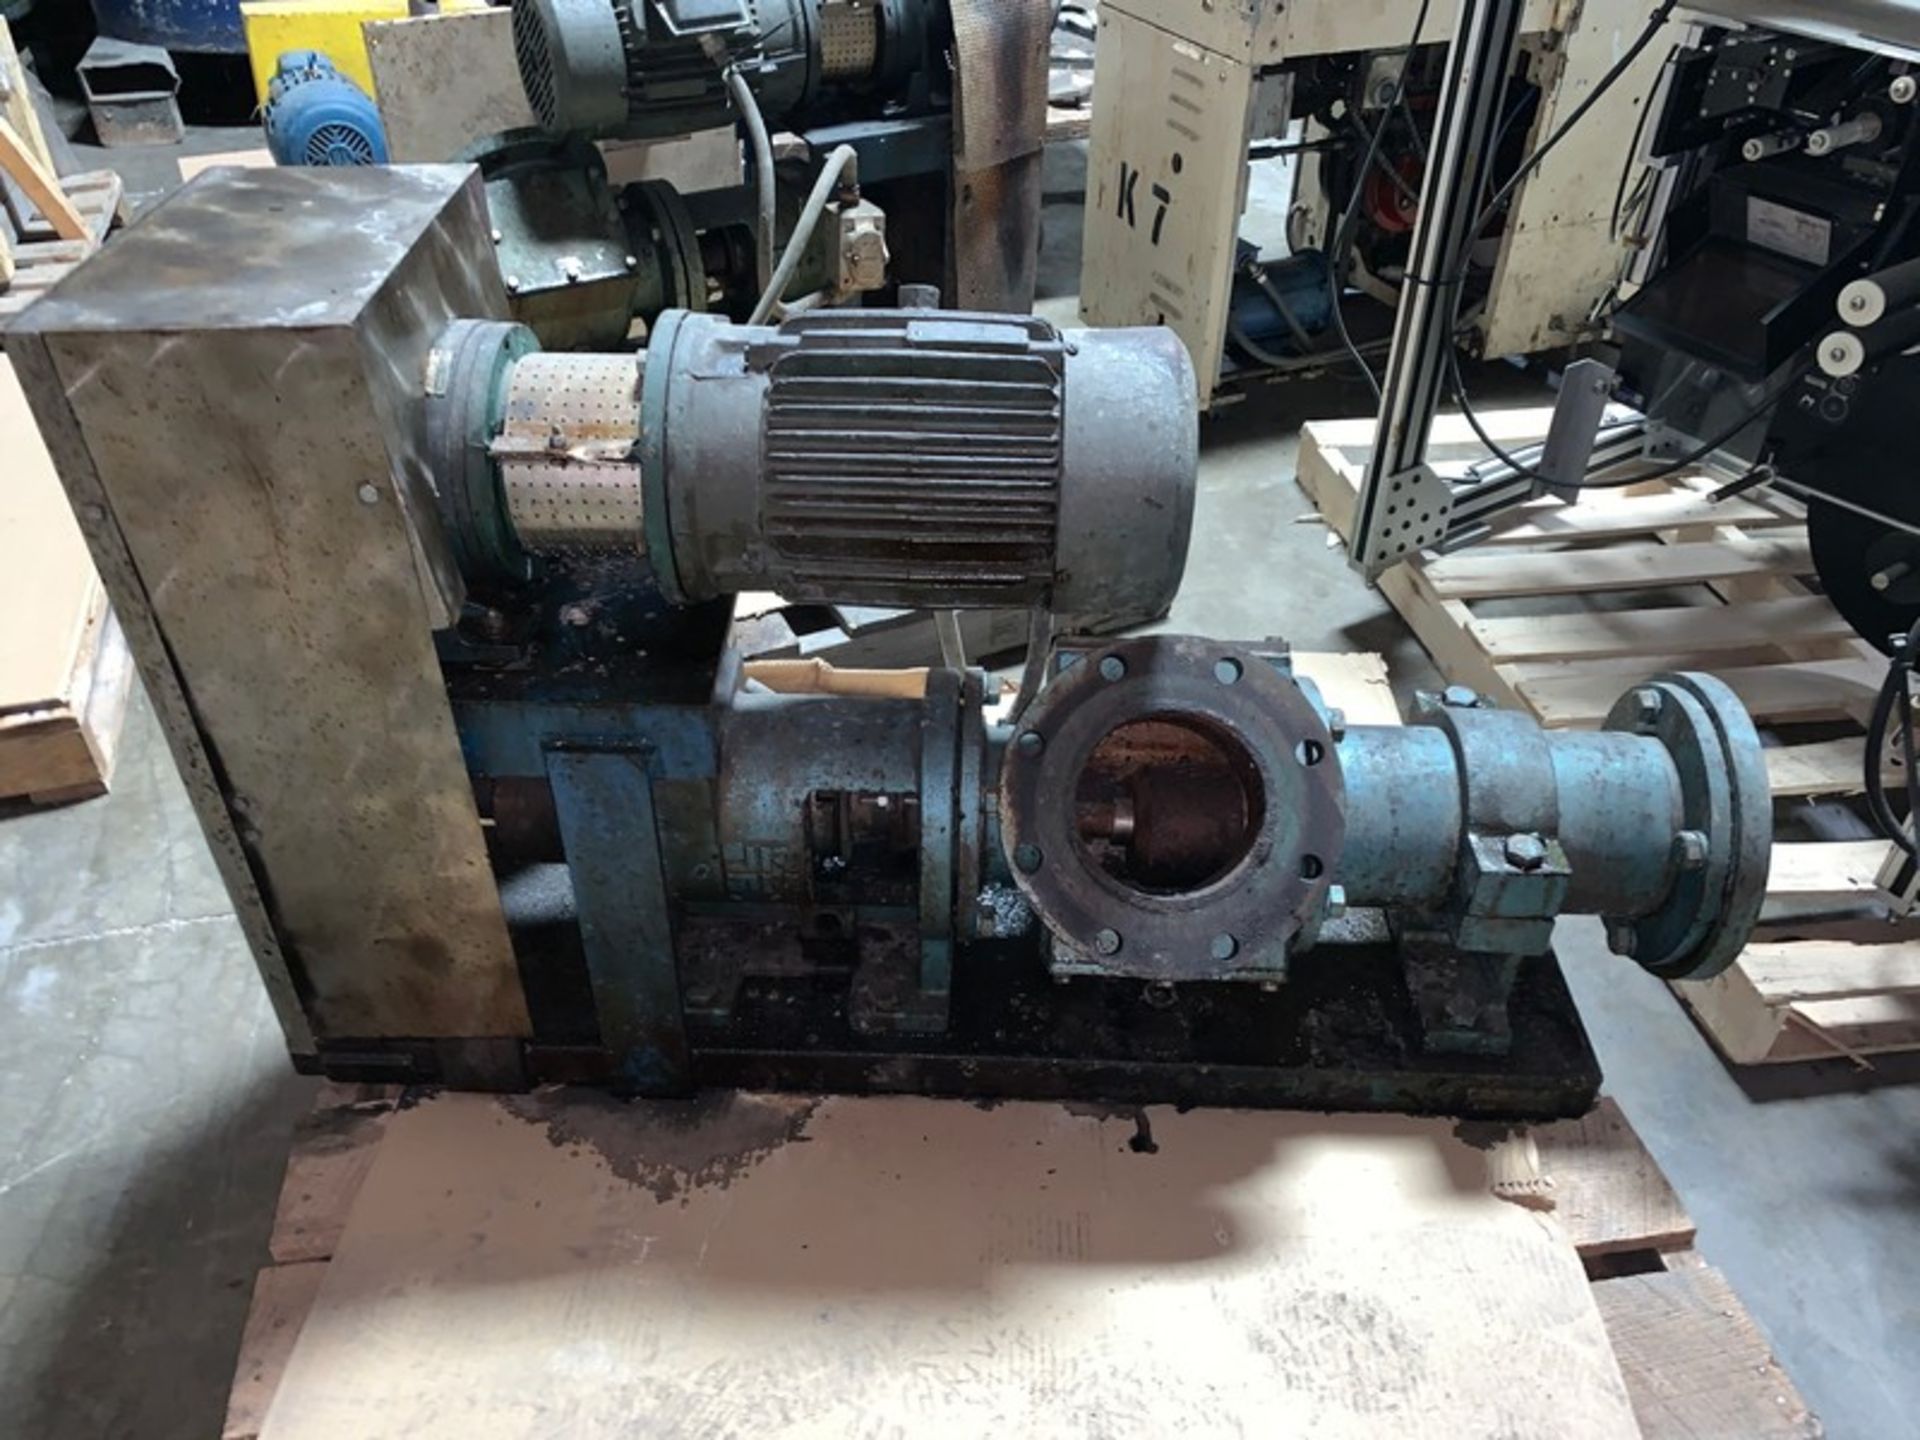 Moyno Progressive Cavity Pump (was used for pumping syrup) Cyco Gear Box and Chain Drive Speed - Image 2 of 6